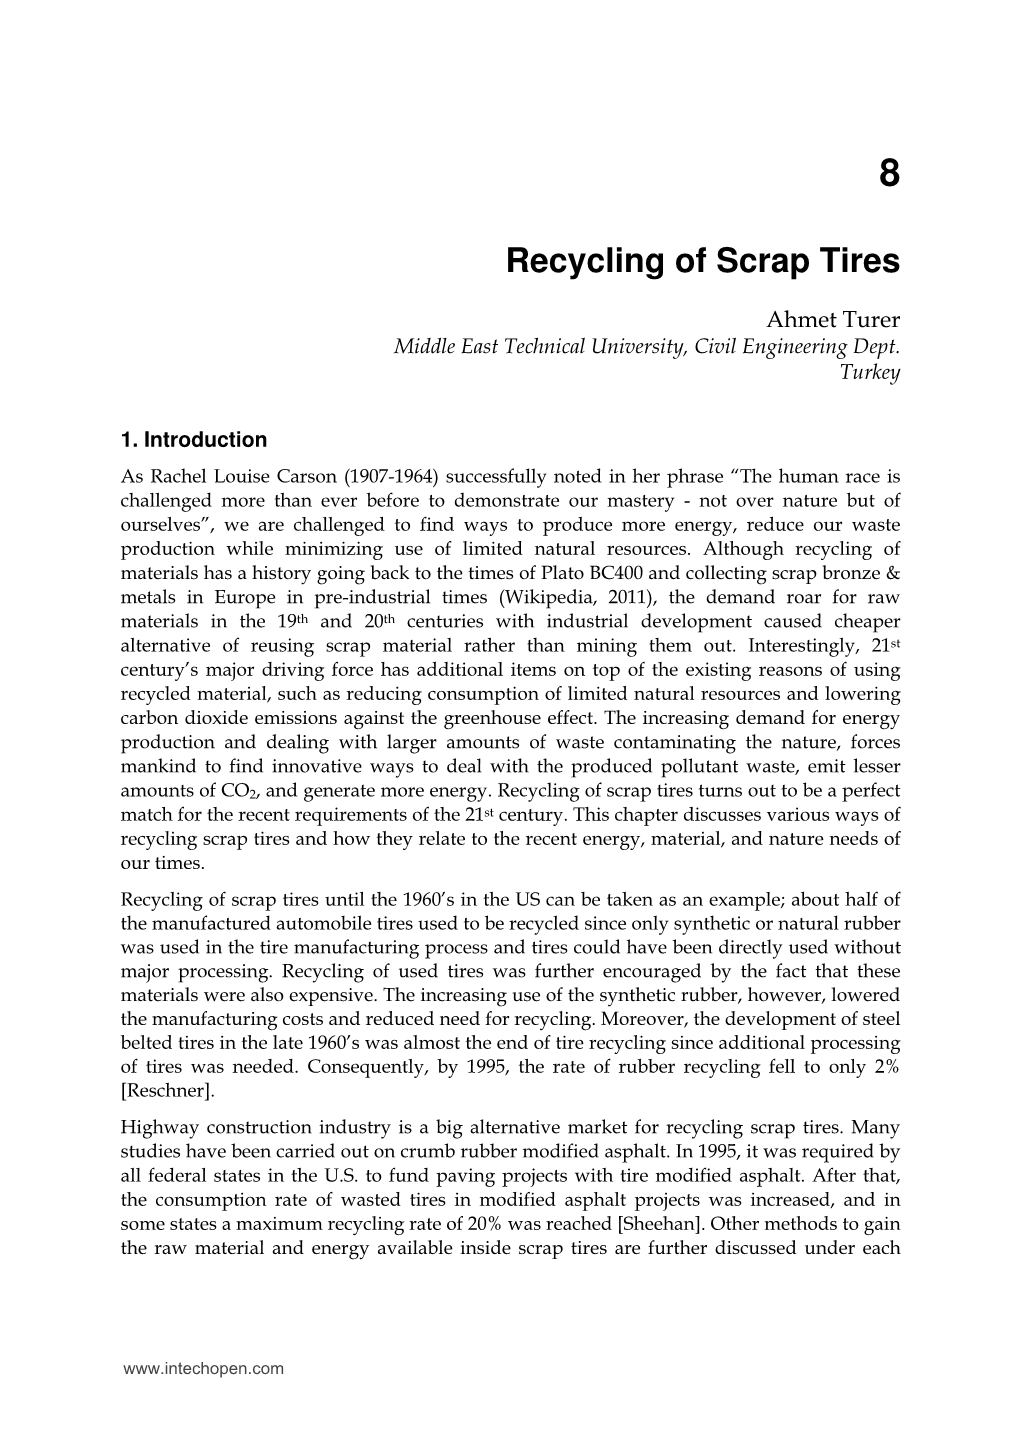 Recycling of Scrap Tires